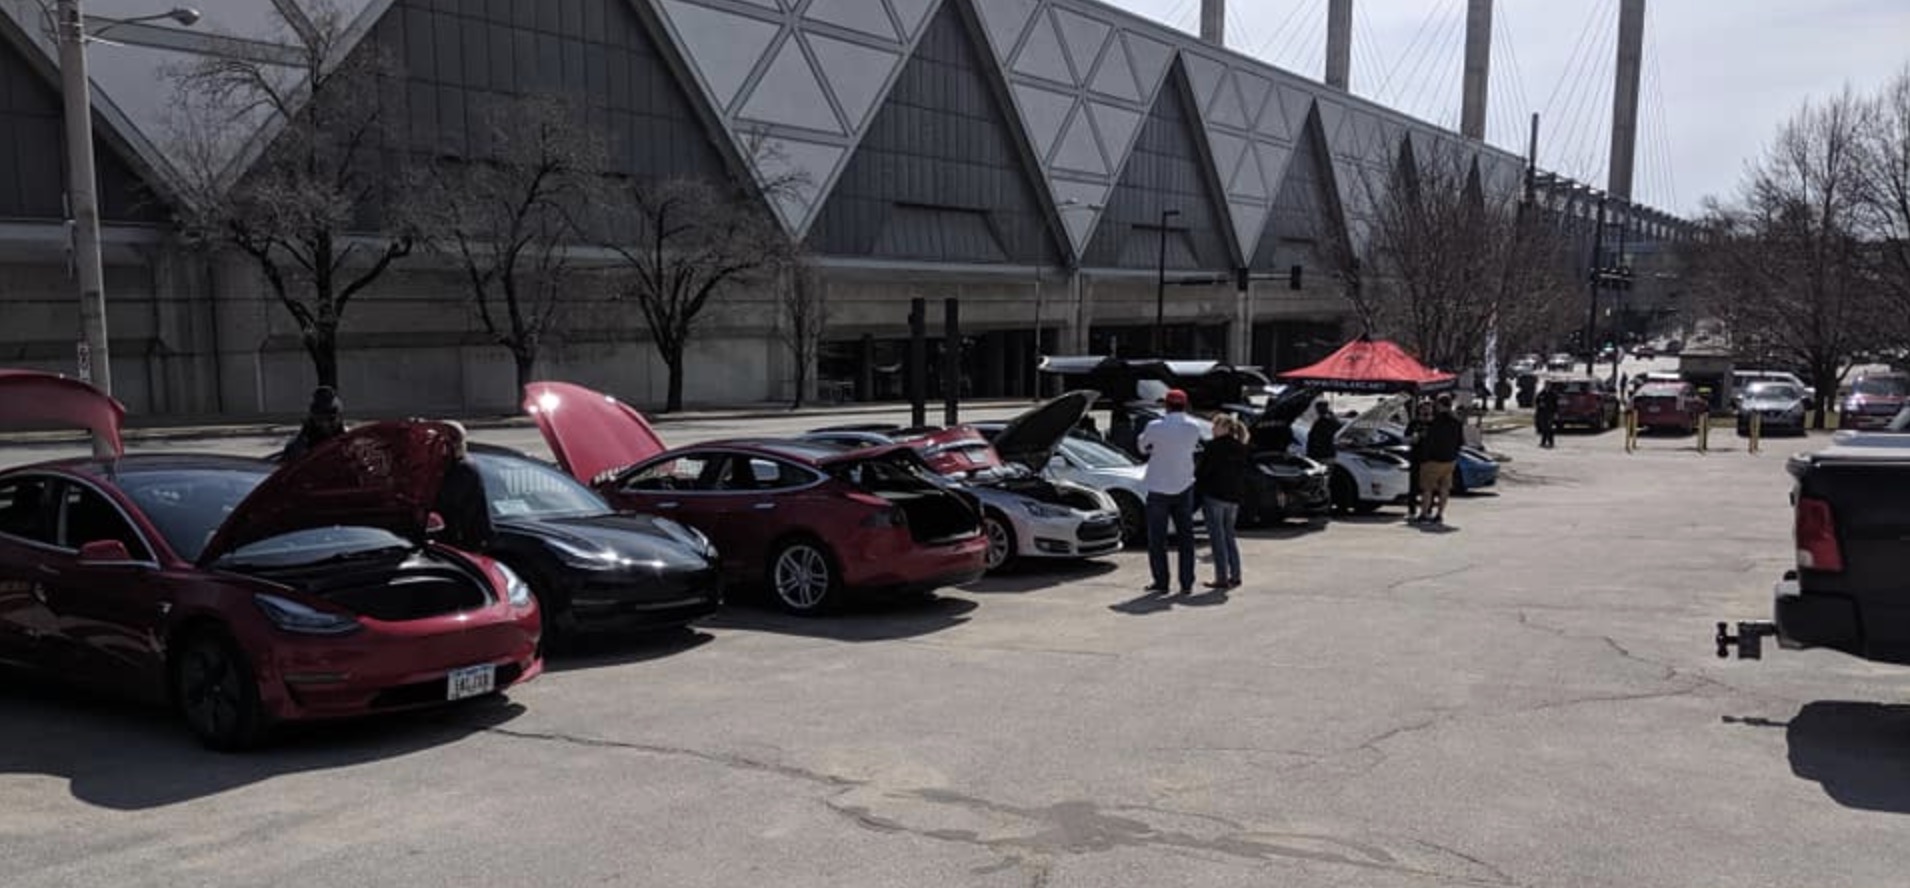 Tesla gets banned from KC Auto Show, owners volunteer to